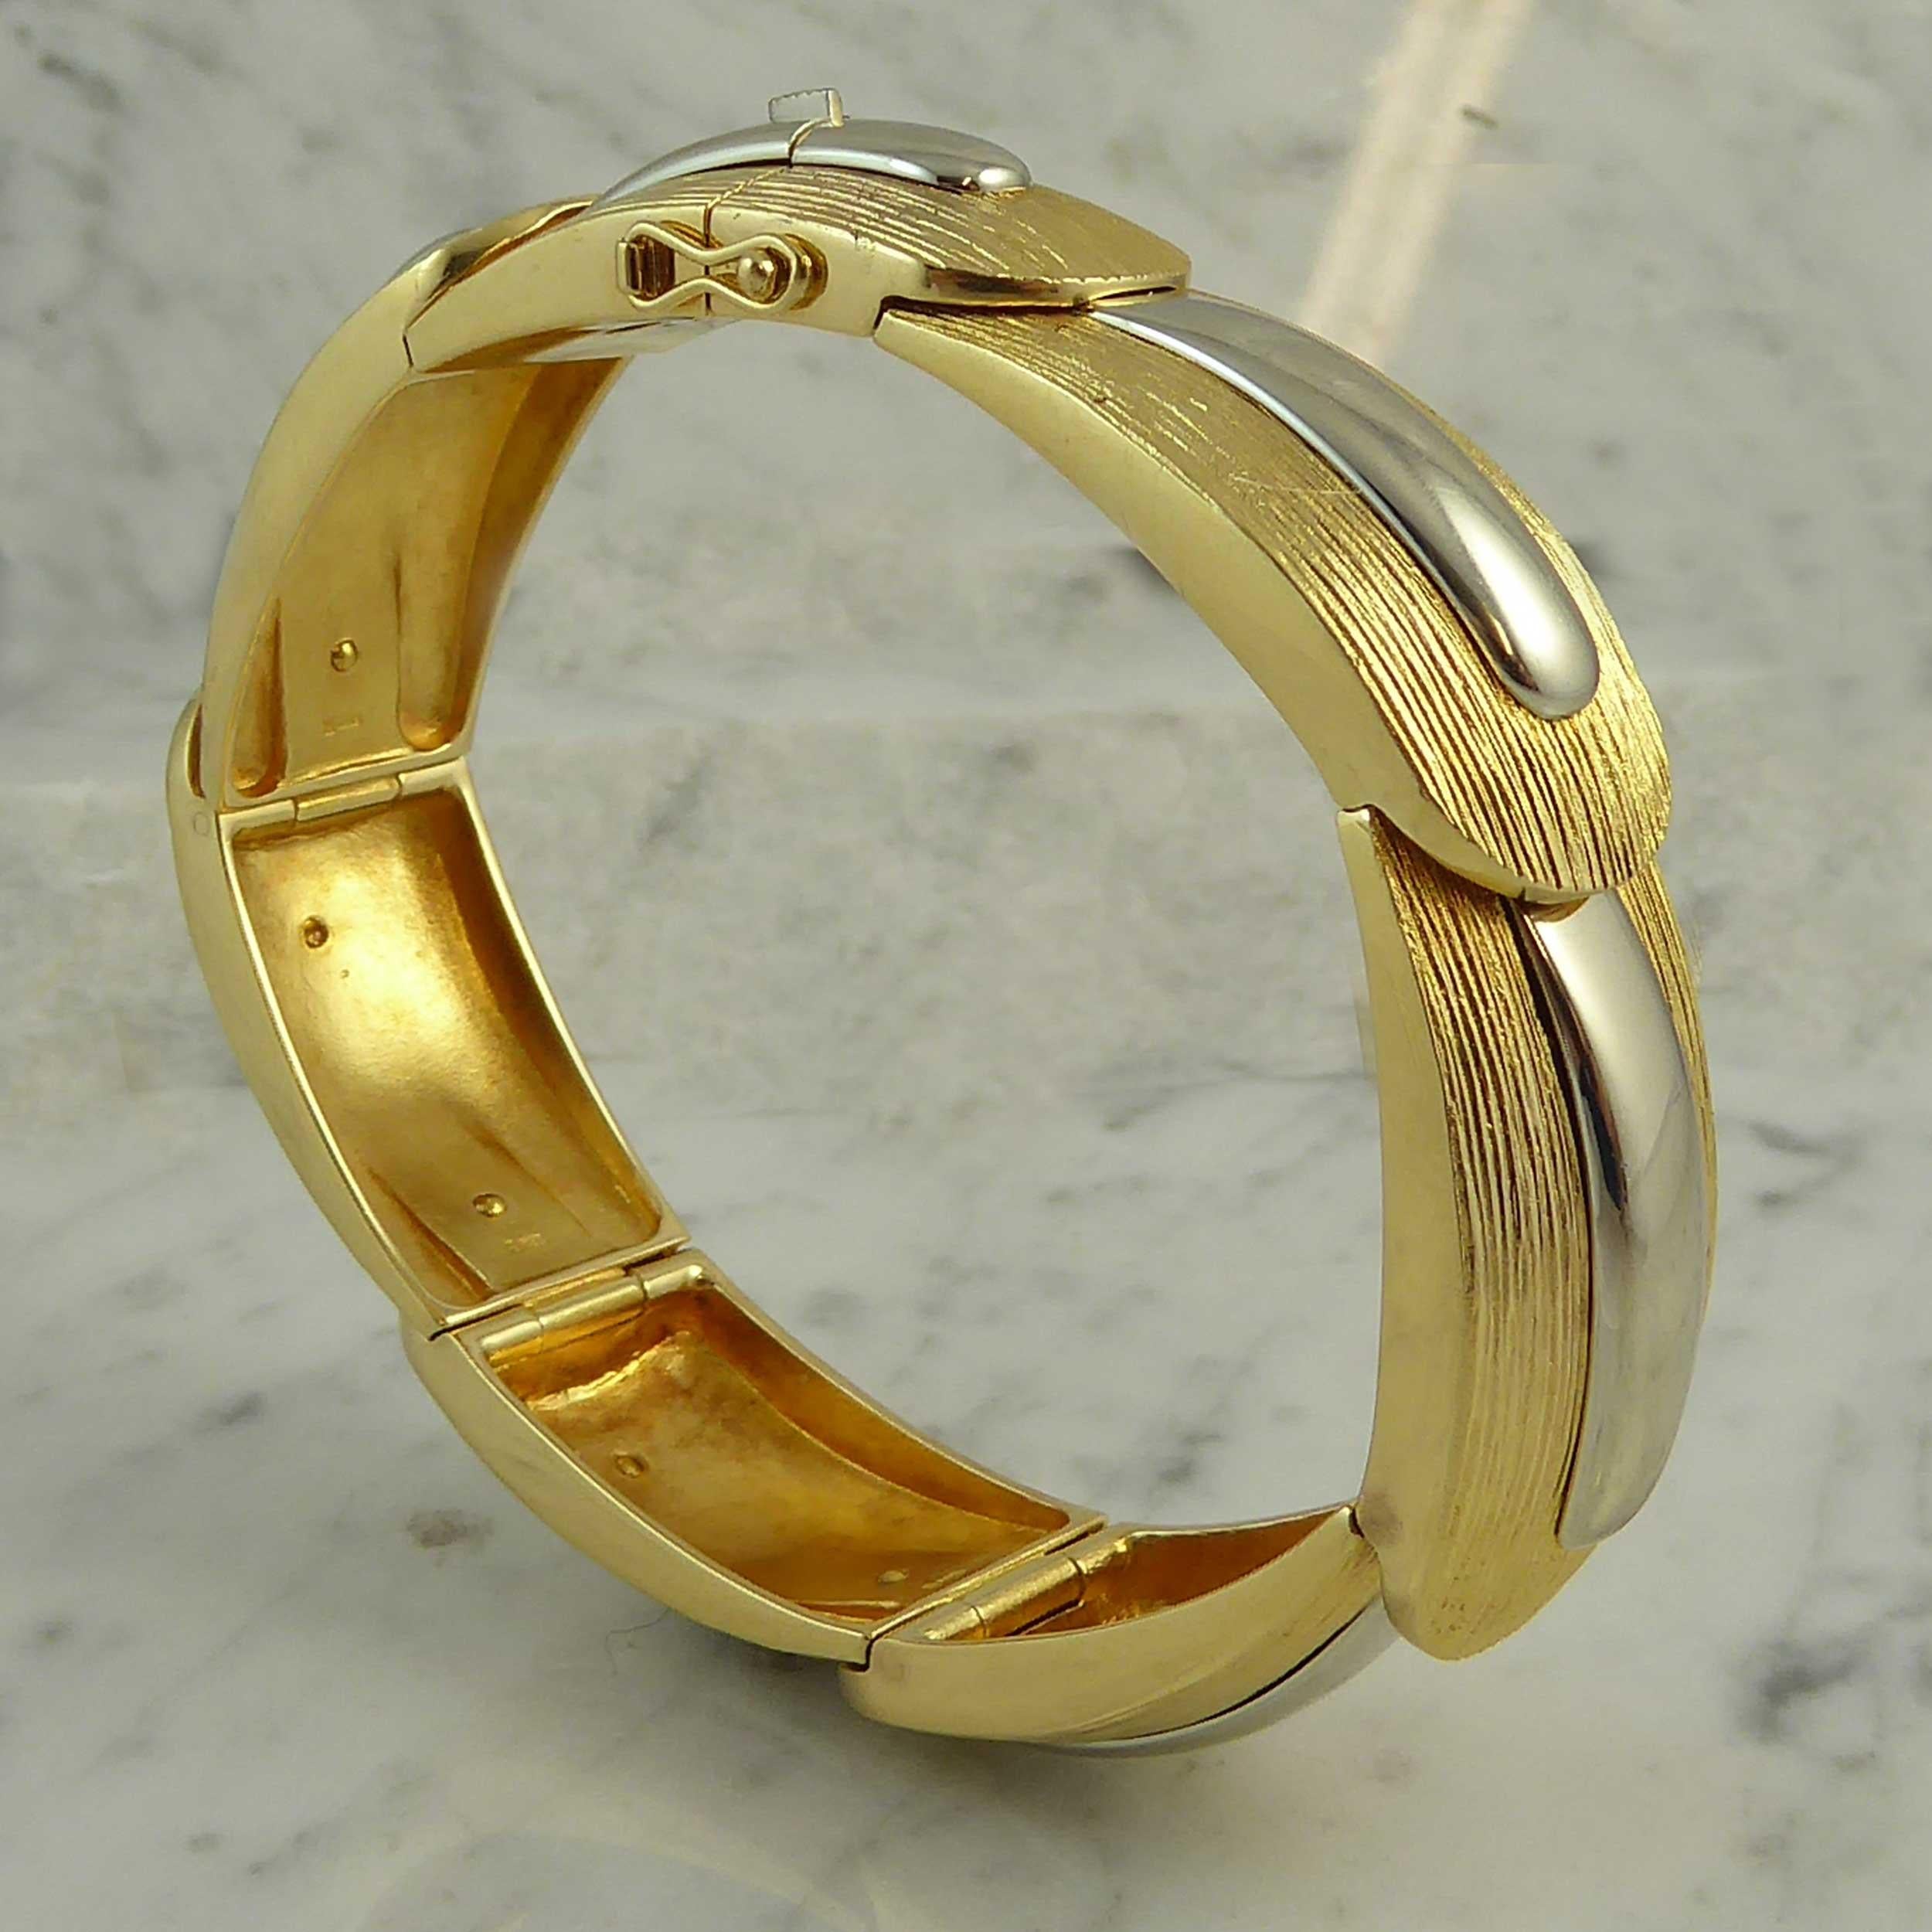 Modernist Vintage Designer Bracelet 1974, Lapponia Finland, Yellow and White Gold, Nordic For Sale